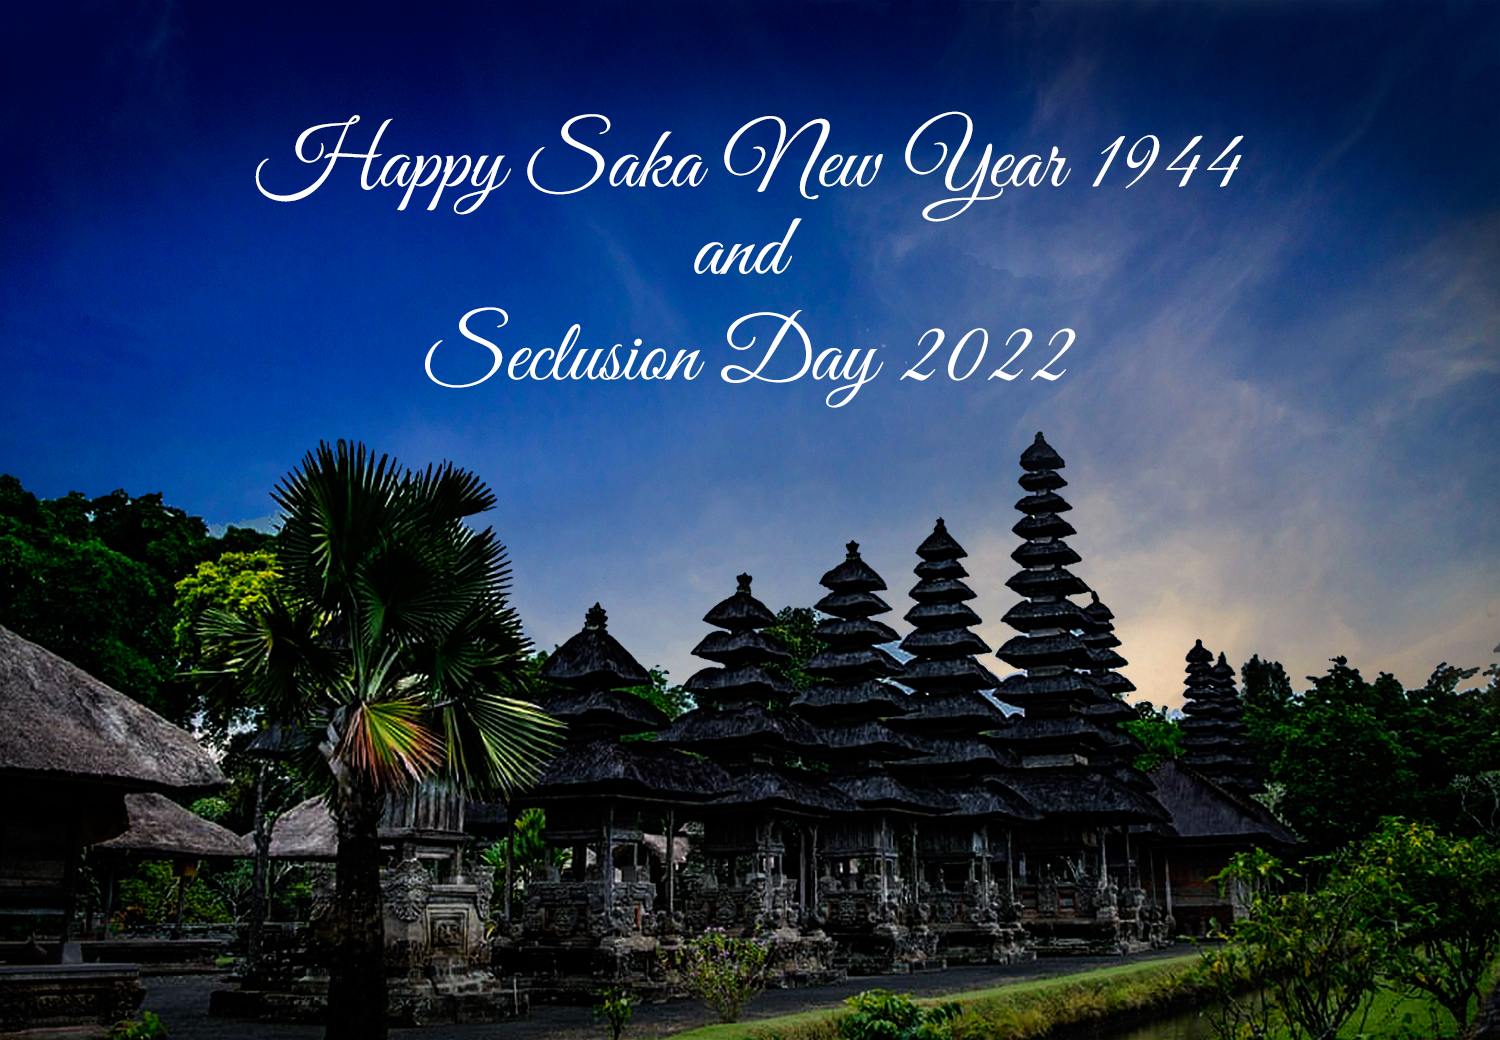 Happy Saka New Year 1944 and Seclusion Day 2022 PROALLIANCE